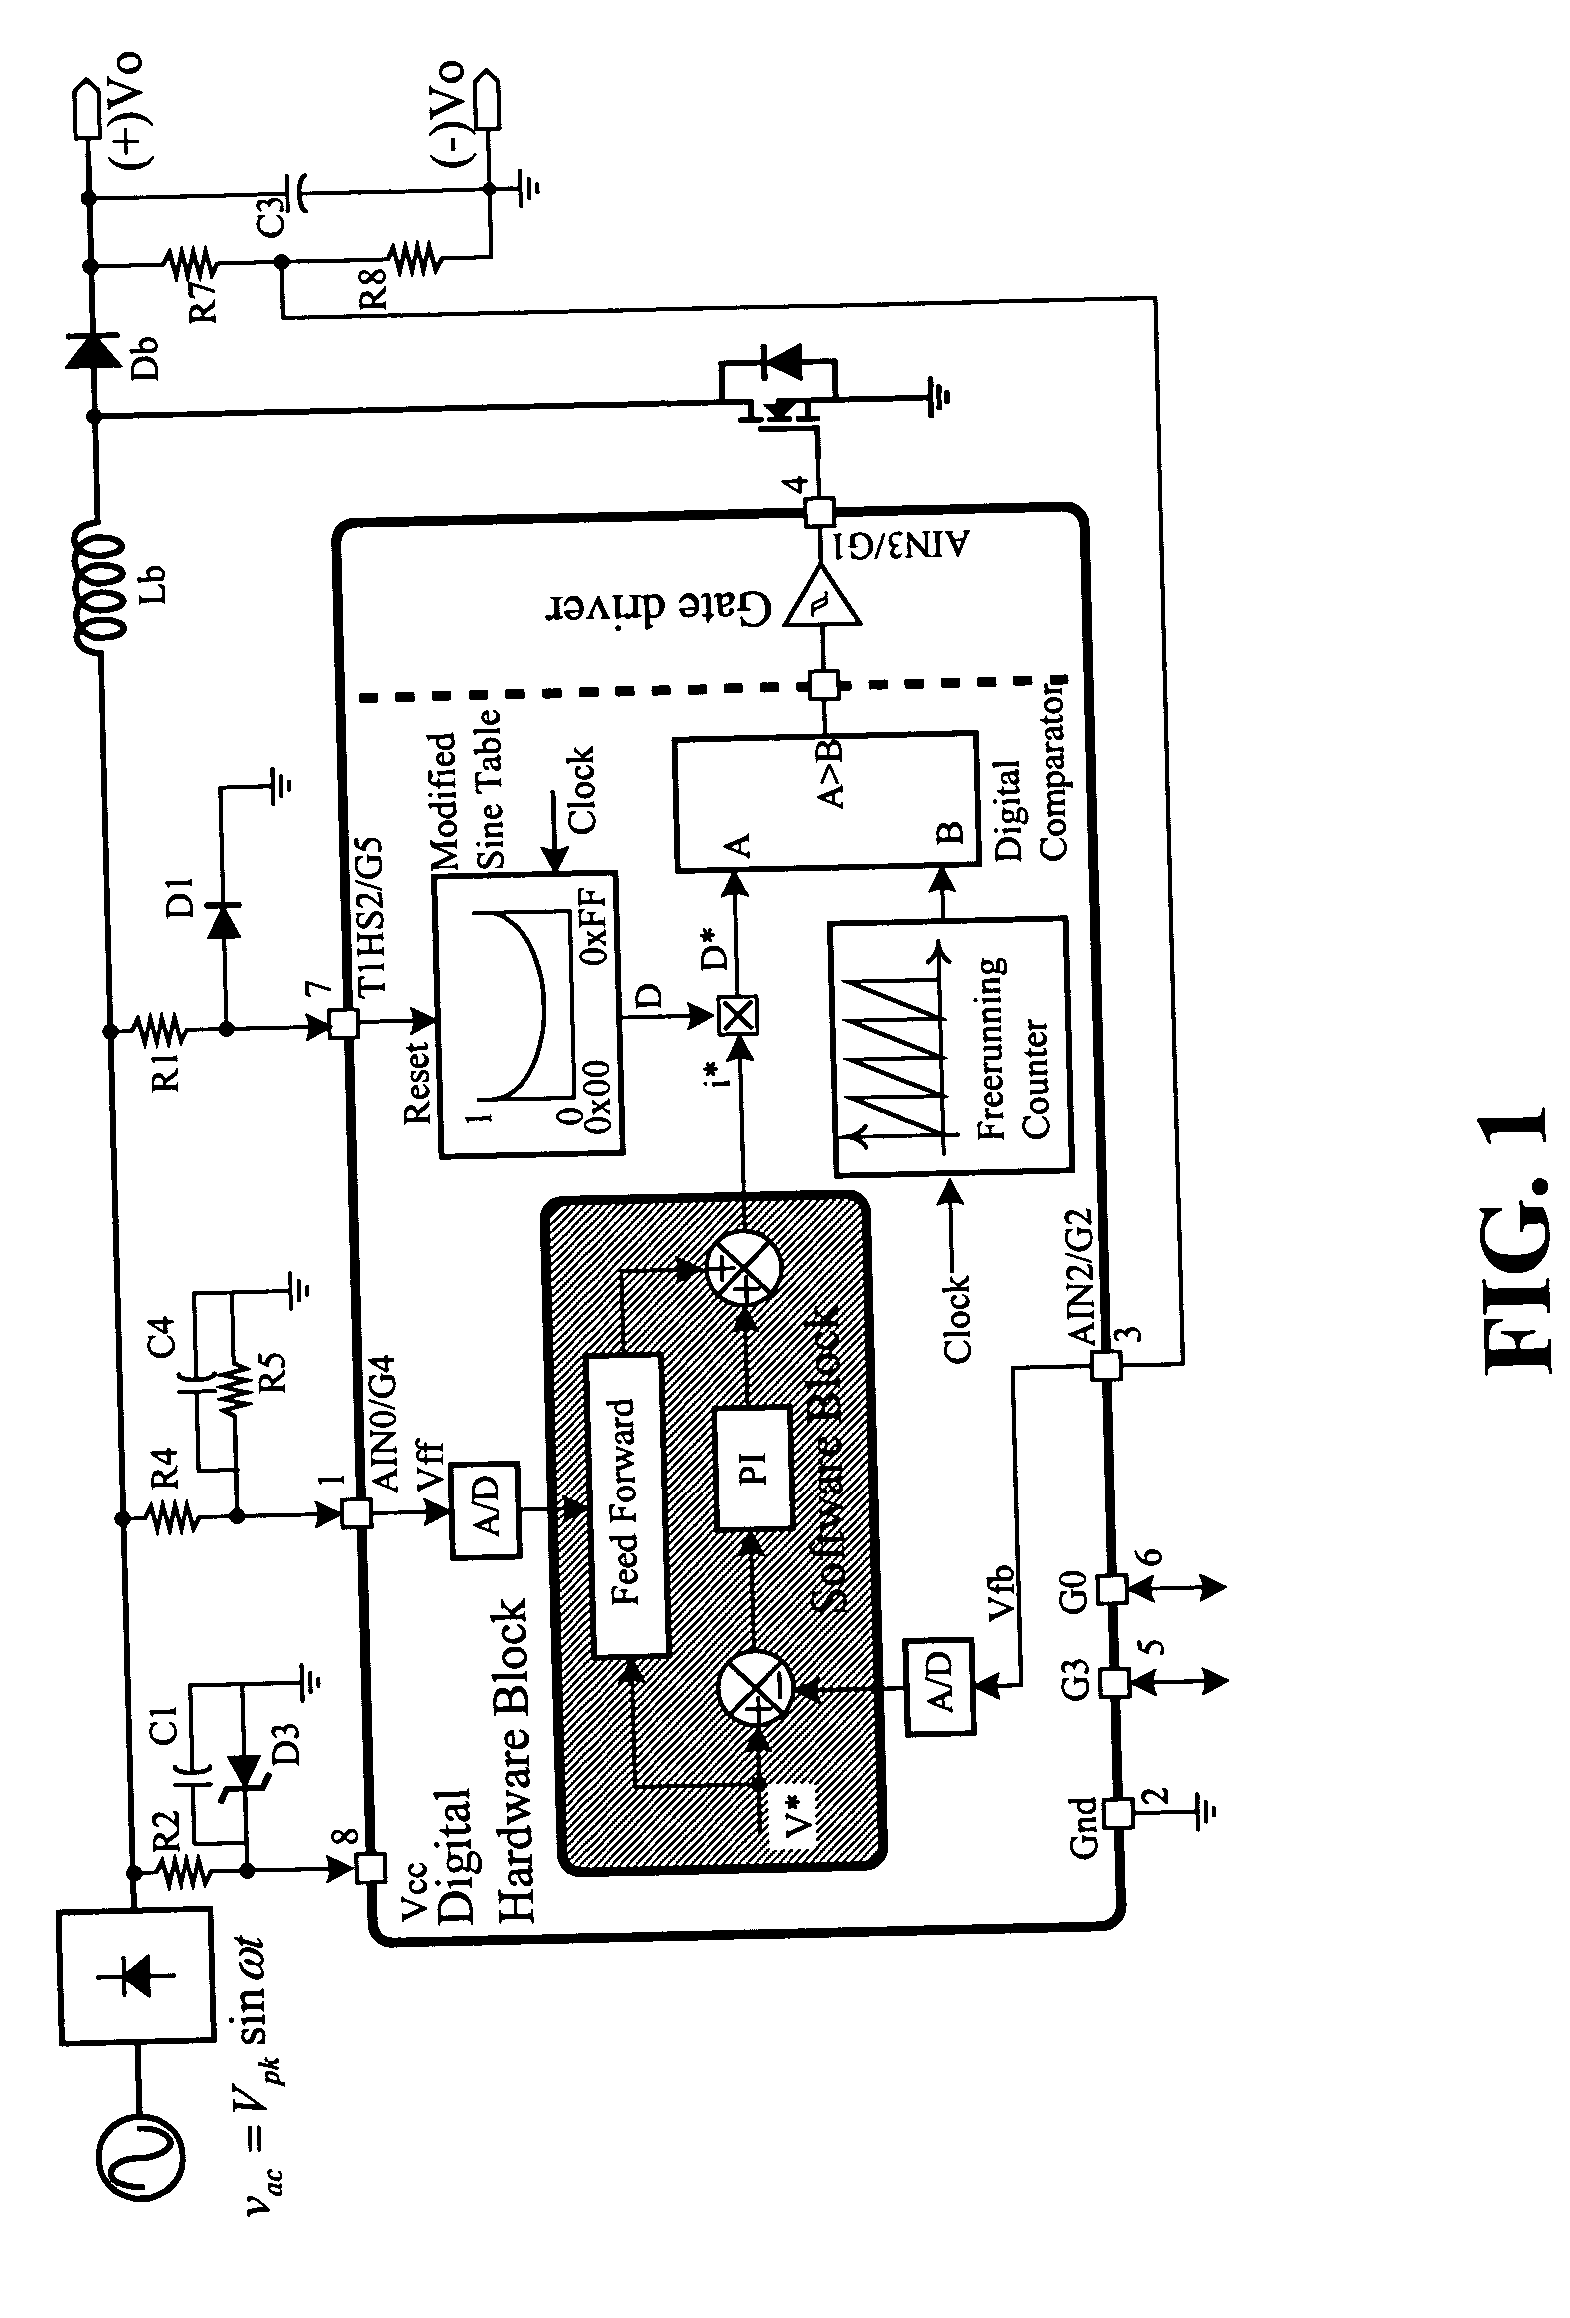 Modified sinusoidal pulse width modulation for full digital power factor correction